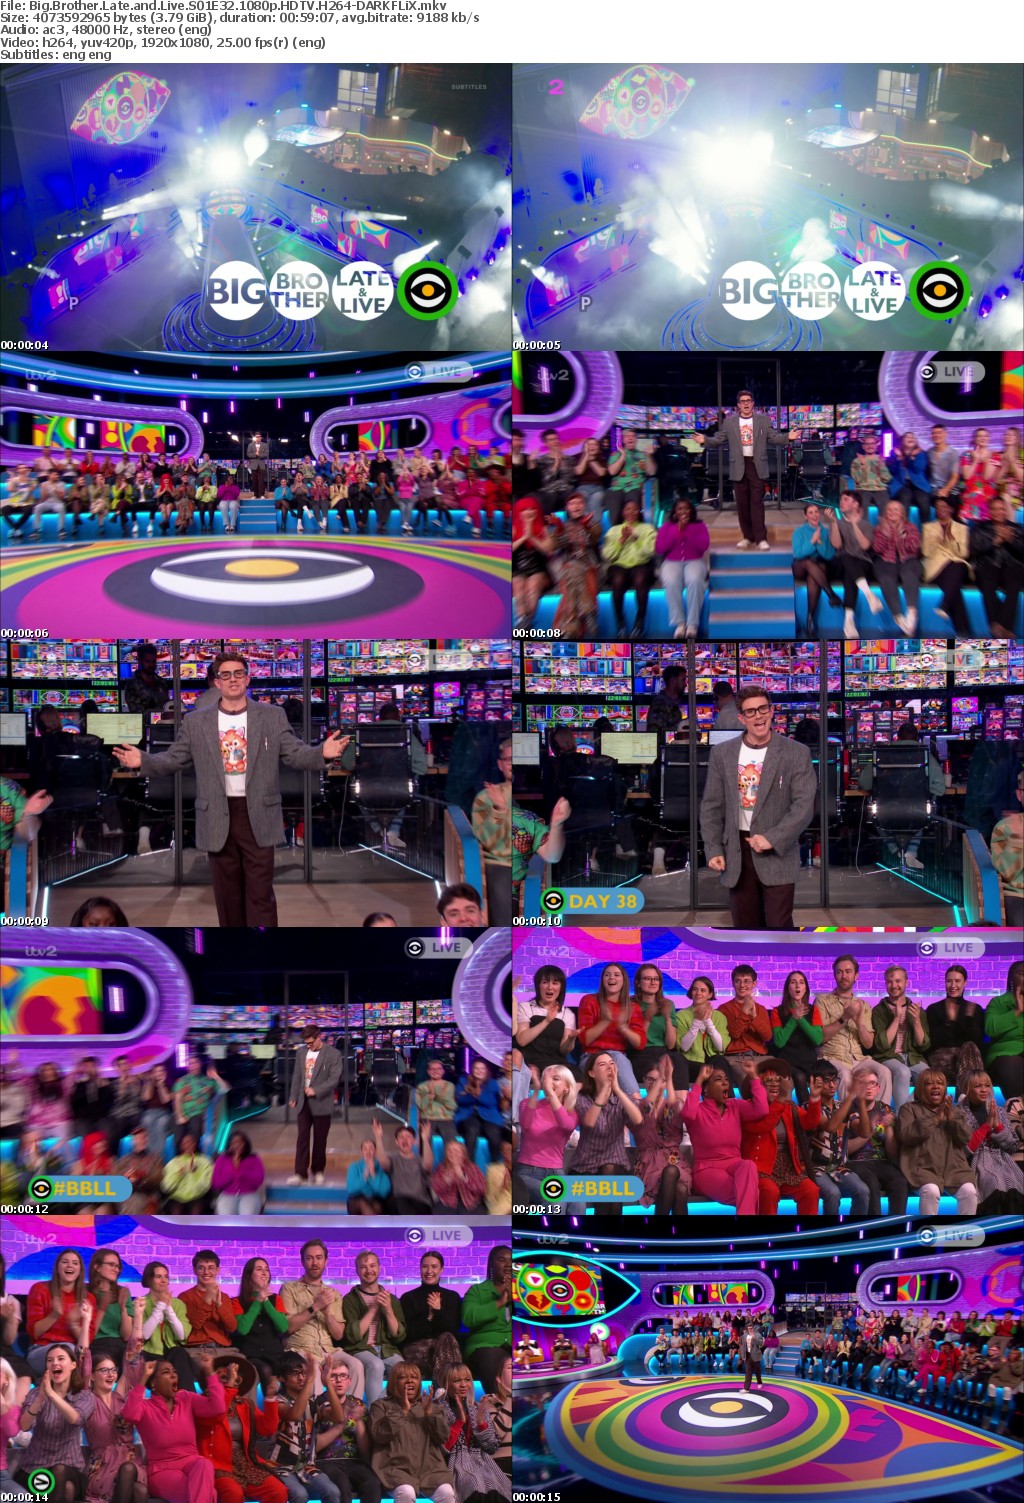 Big Brother Late and Live S01E32 1080p HDTV H264-DARKFLiX